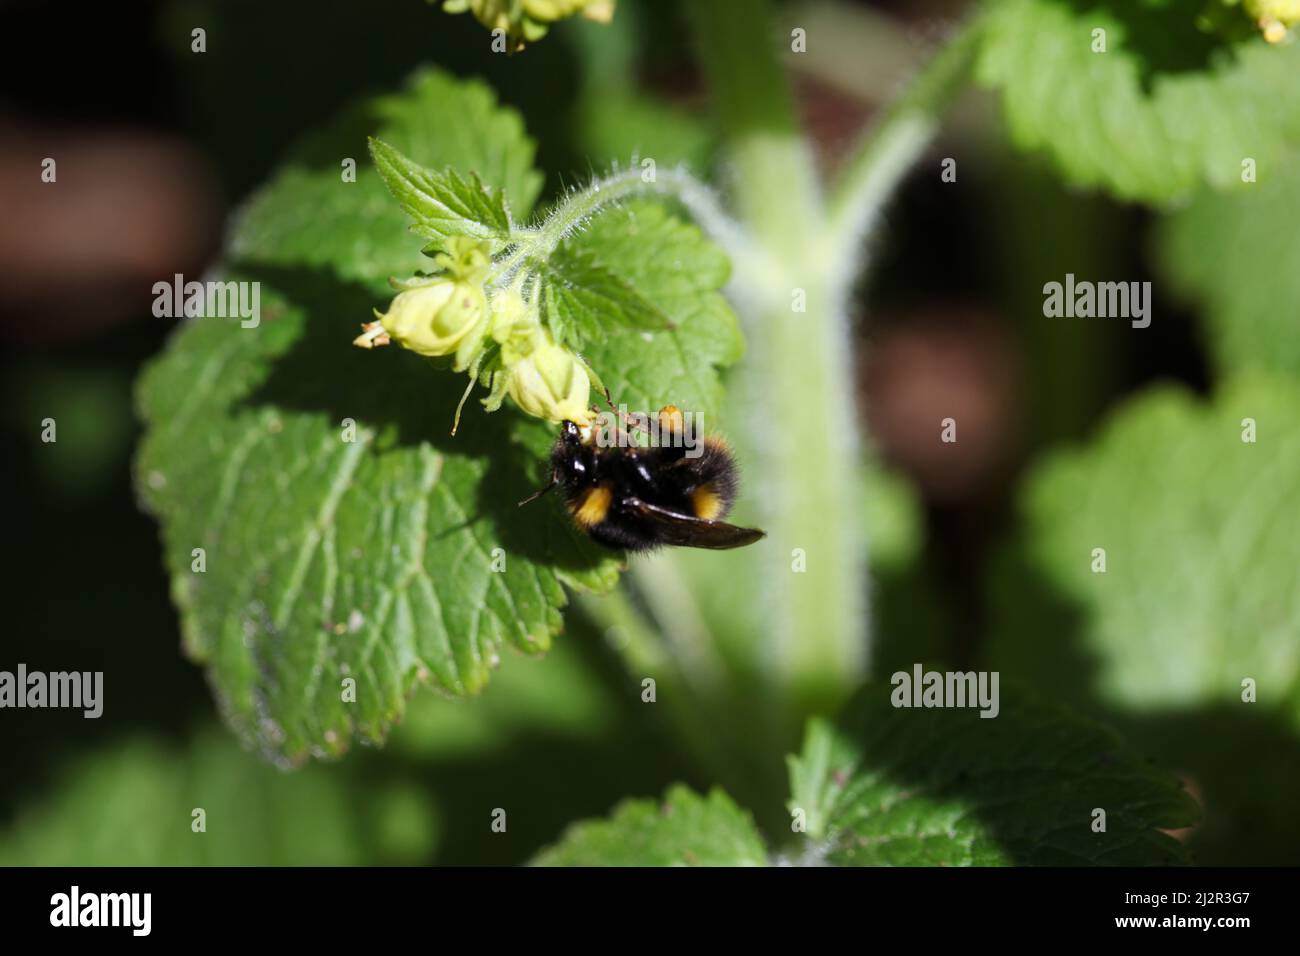 Close-up of a Hairy-Footed Flower bee,  Anthophora plumipes, foraging on a Yellow figwort plant, Scrophularia vernalis Stock Photo